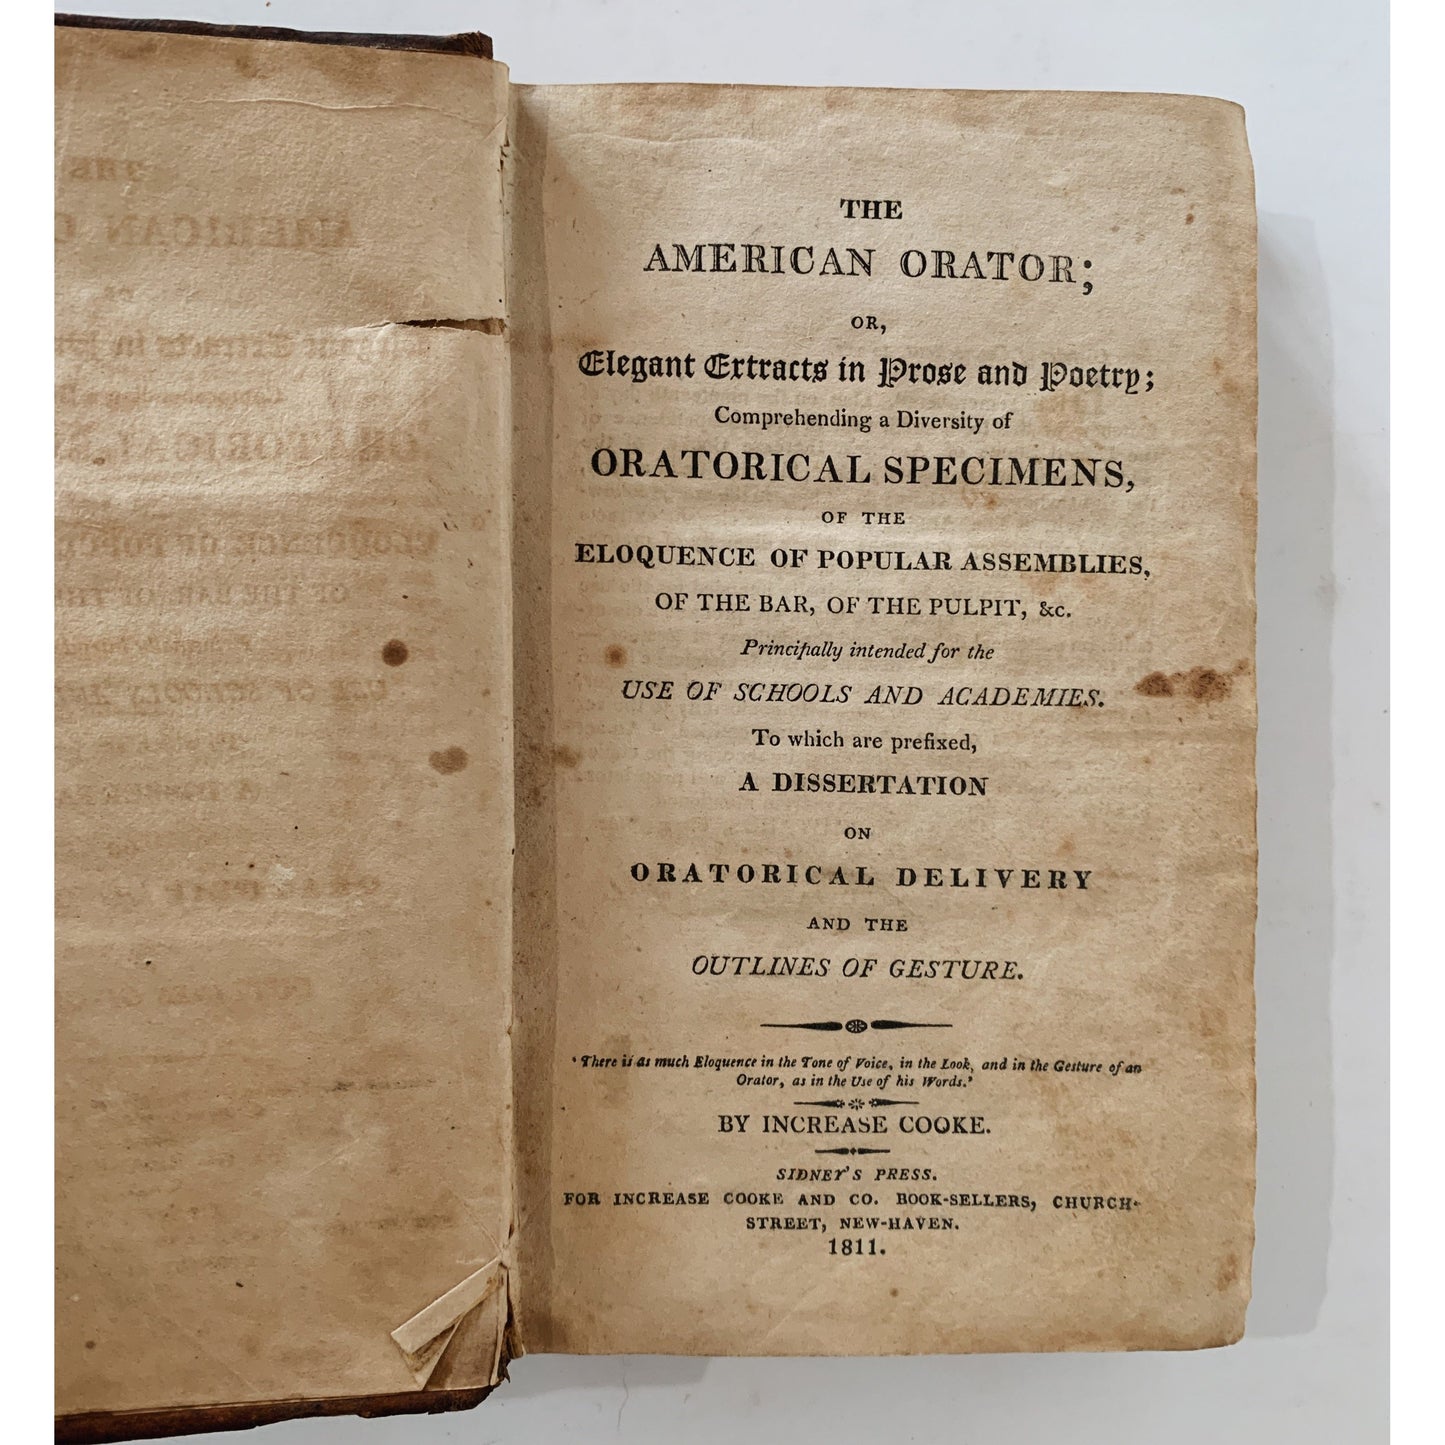 The American Orator by Increase Cooke, First Ed, 1811, Oratory and Elocution